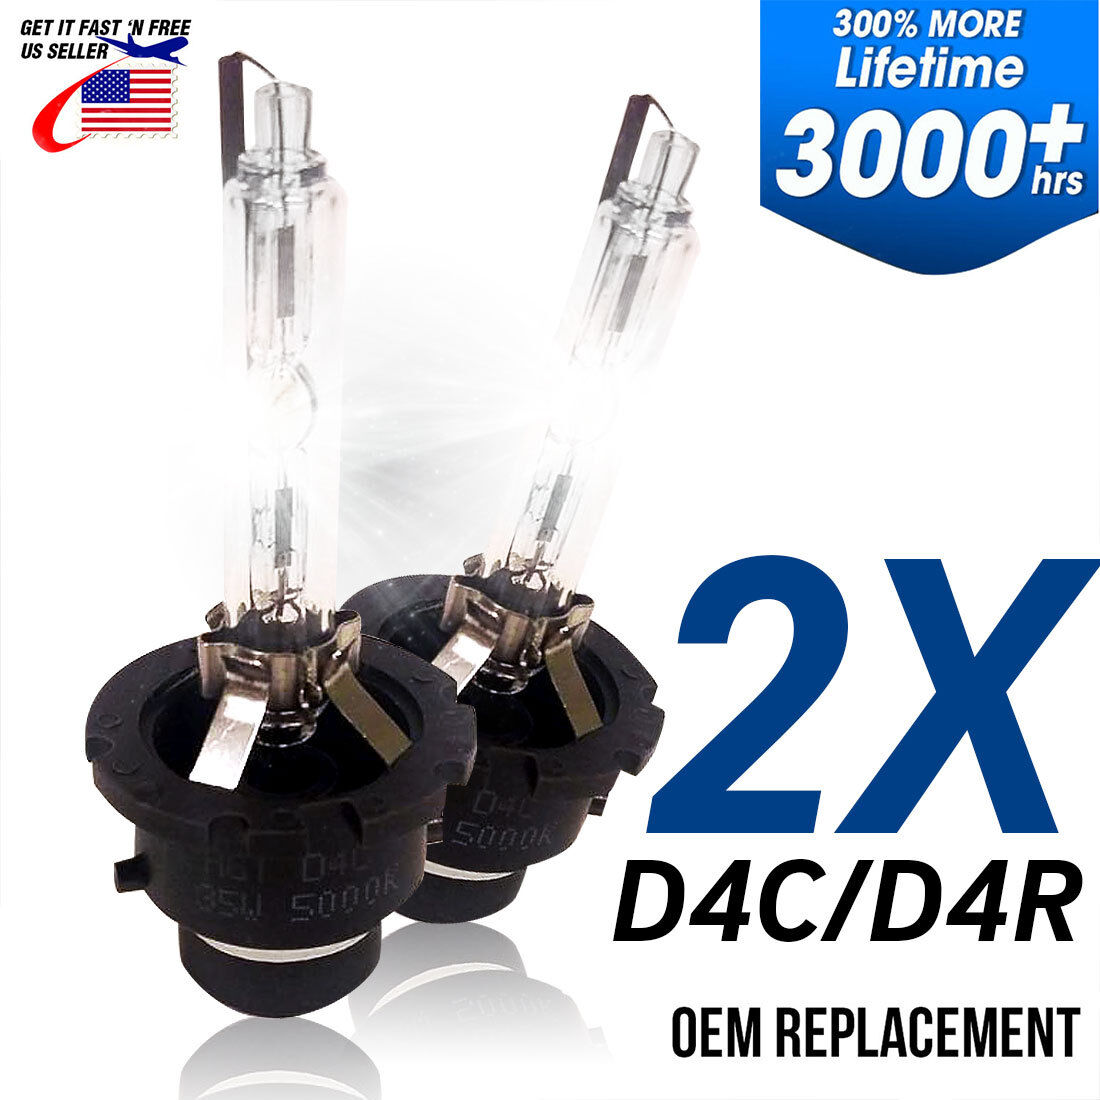 2 D4R D4S HID Bulb Xenon Fit OEM Replacement Headlight for Toyota Lexus